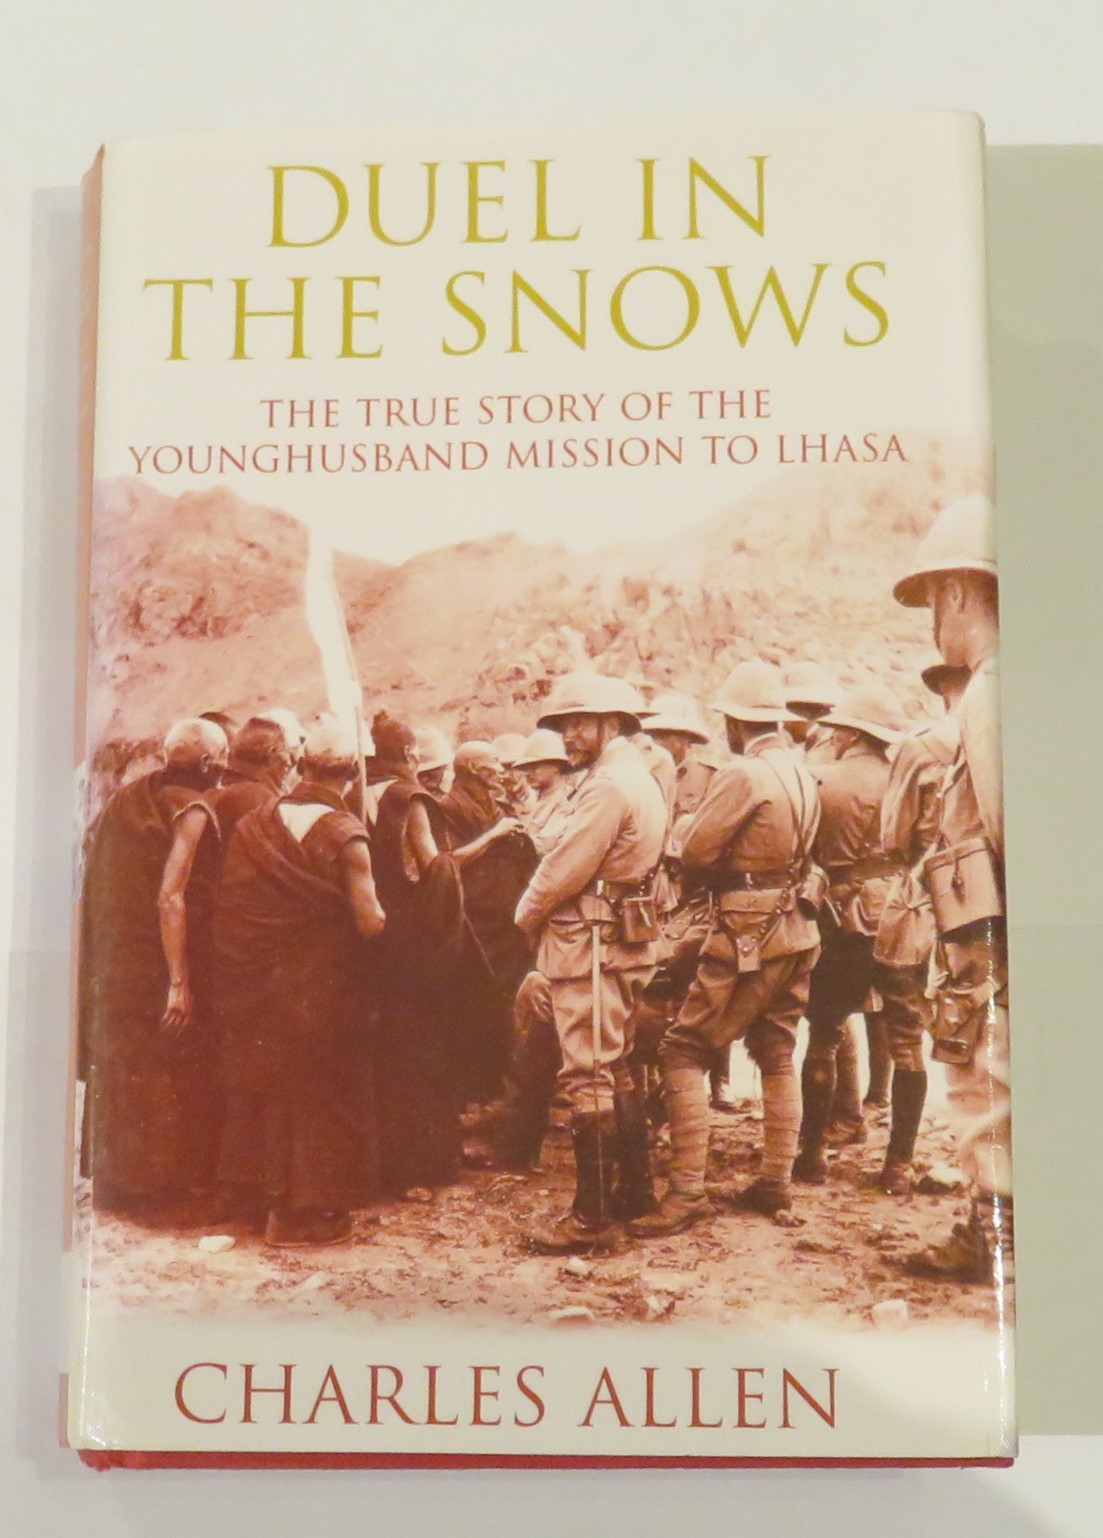 Duel in the Snows: The True Story of the Younghusband Mission to Lhasa